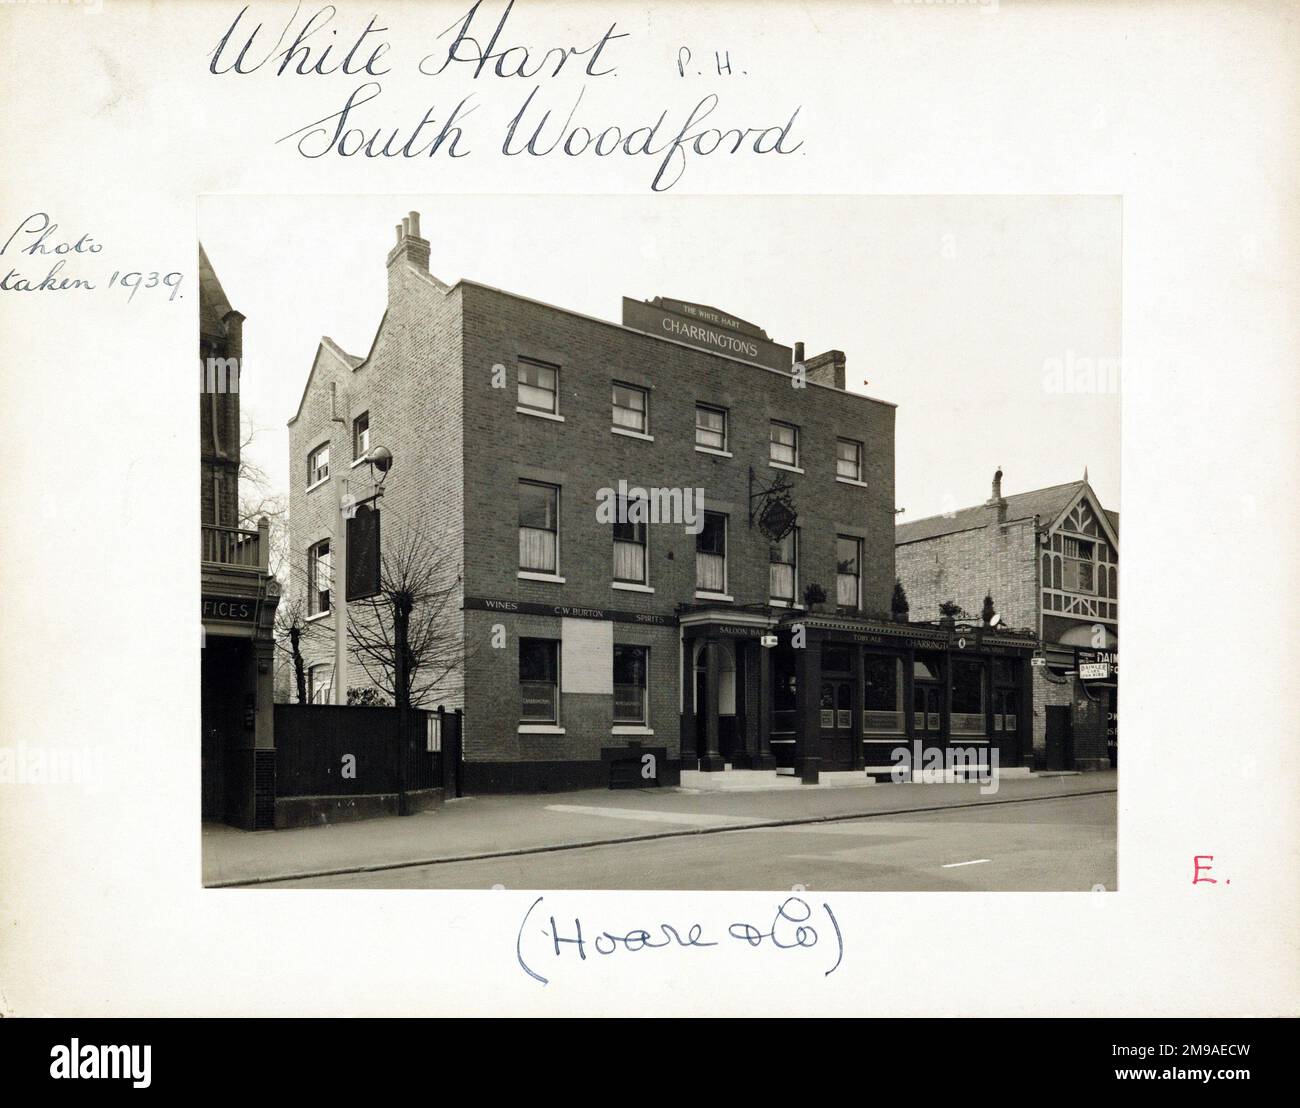 Photograph of White Hart PH, South Woodford, London. The main side of the print (shown here) depicts: Left Face on view of the pub.  The back of the print (available on request) details: Trading Record 1934 . 1961 for the White Hart, South Woodford, London E18 2PA. As of July 2018 . Renamed Funkymojoe in July 2008, a nightclub closing in late 2014 following complaints about anti social behaviour. Now a LDN Grill, Restaurant & Cocktail Bar .Enterprise Inns Stock Photo